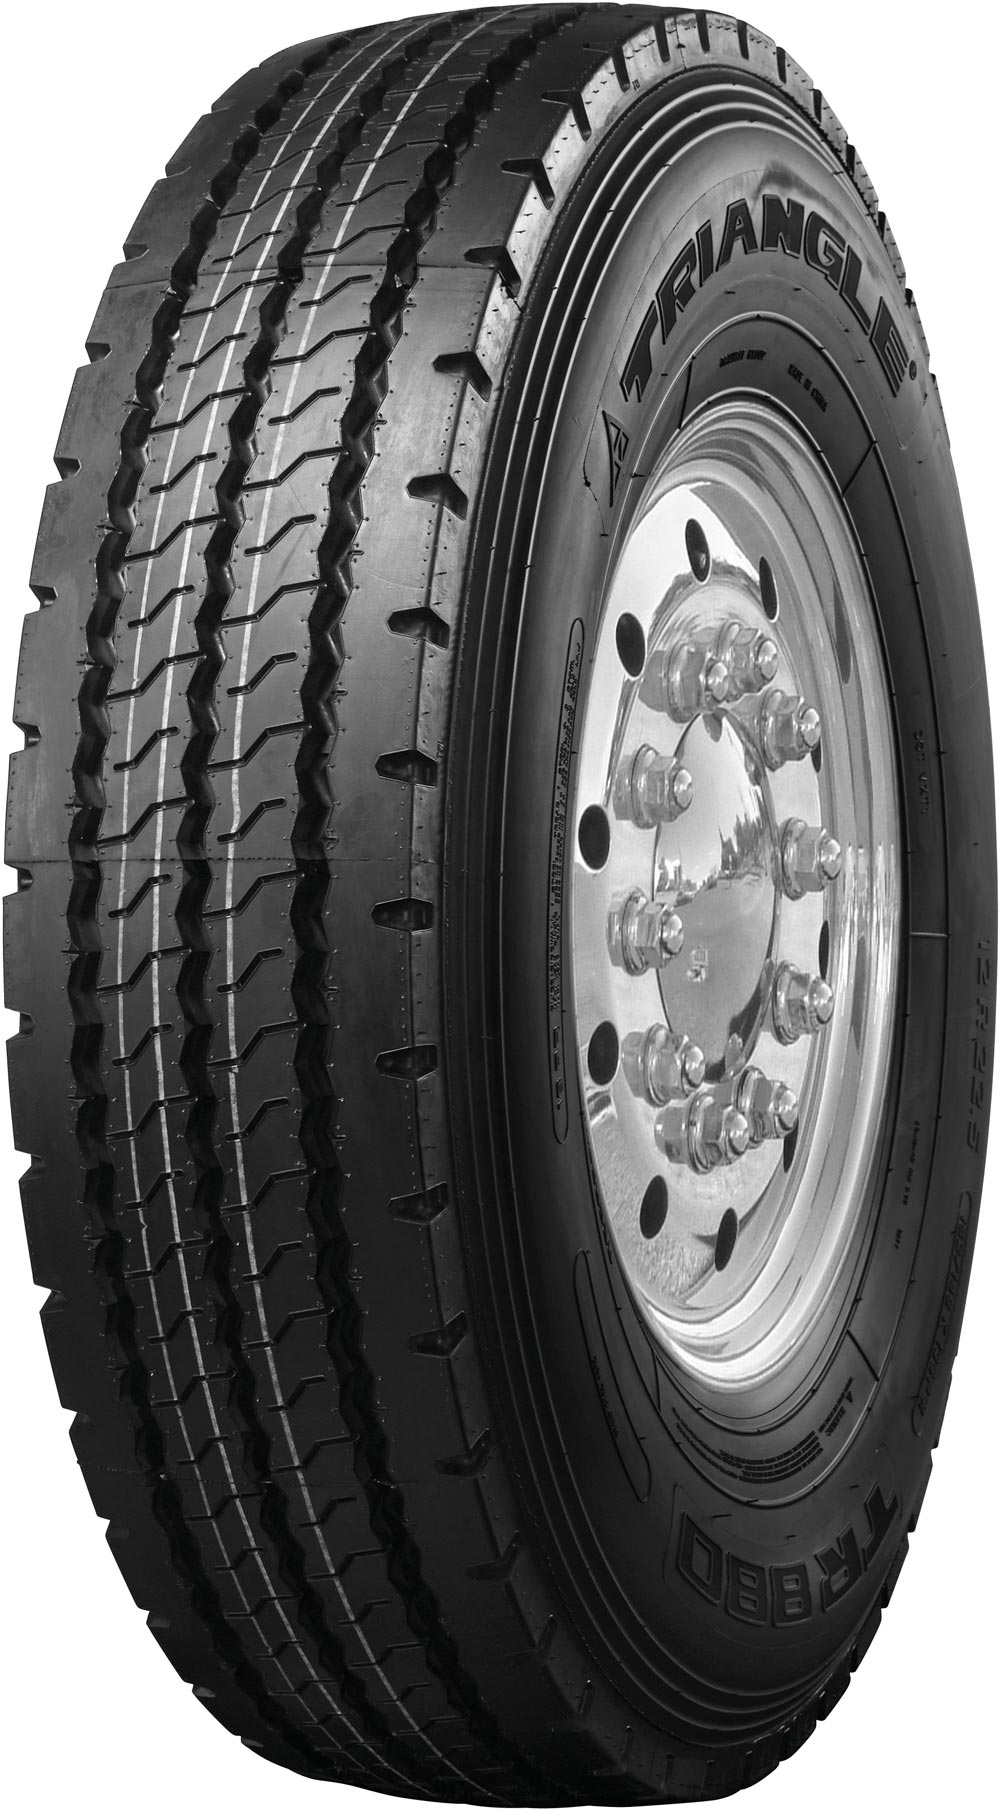 product_type-heavy_tires Triangle TR880 11 R22.5 146M